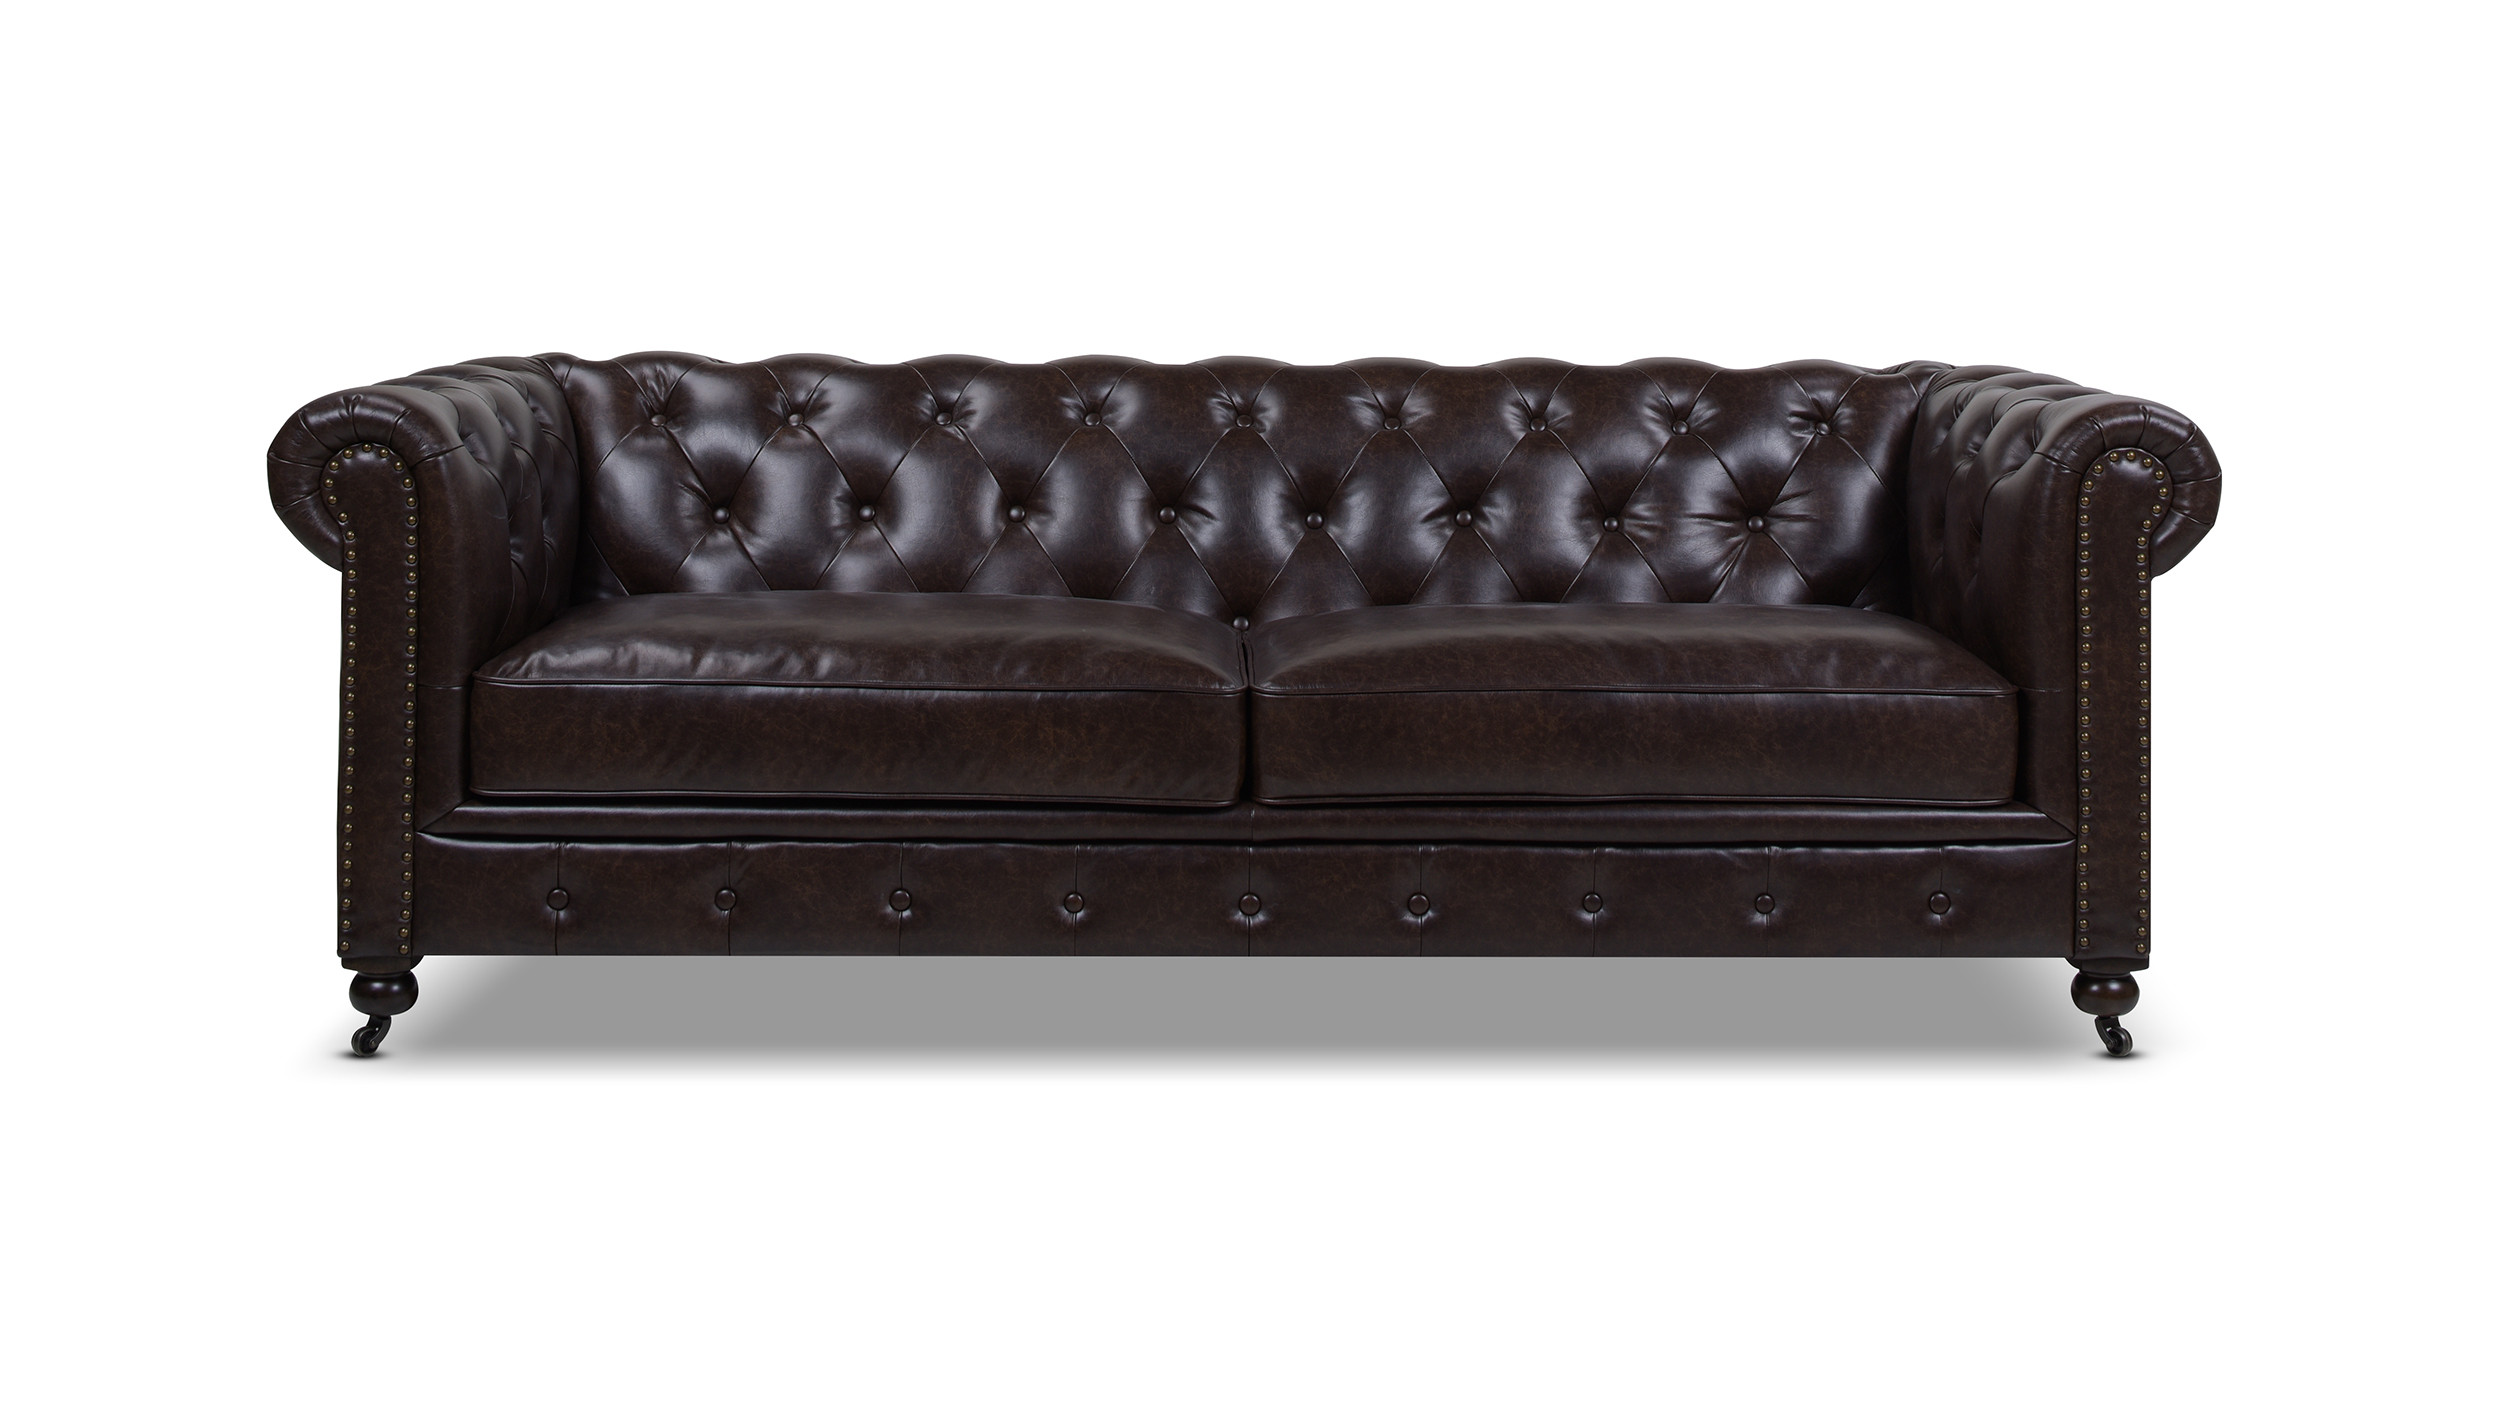 Winston 91" Tufted Chesterfield Sofa, Vintage Brown - Jennifer Taylor Home